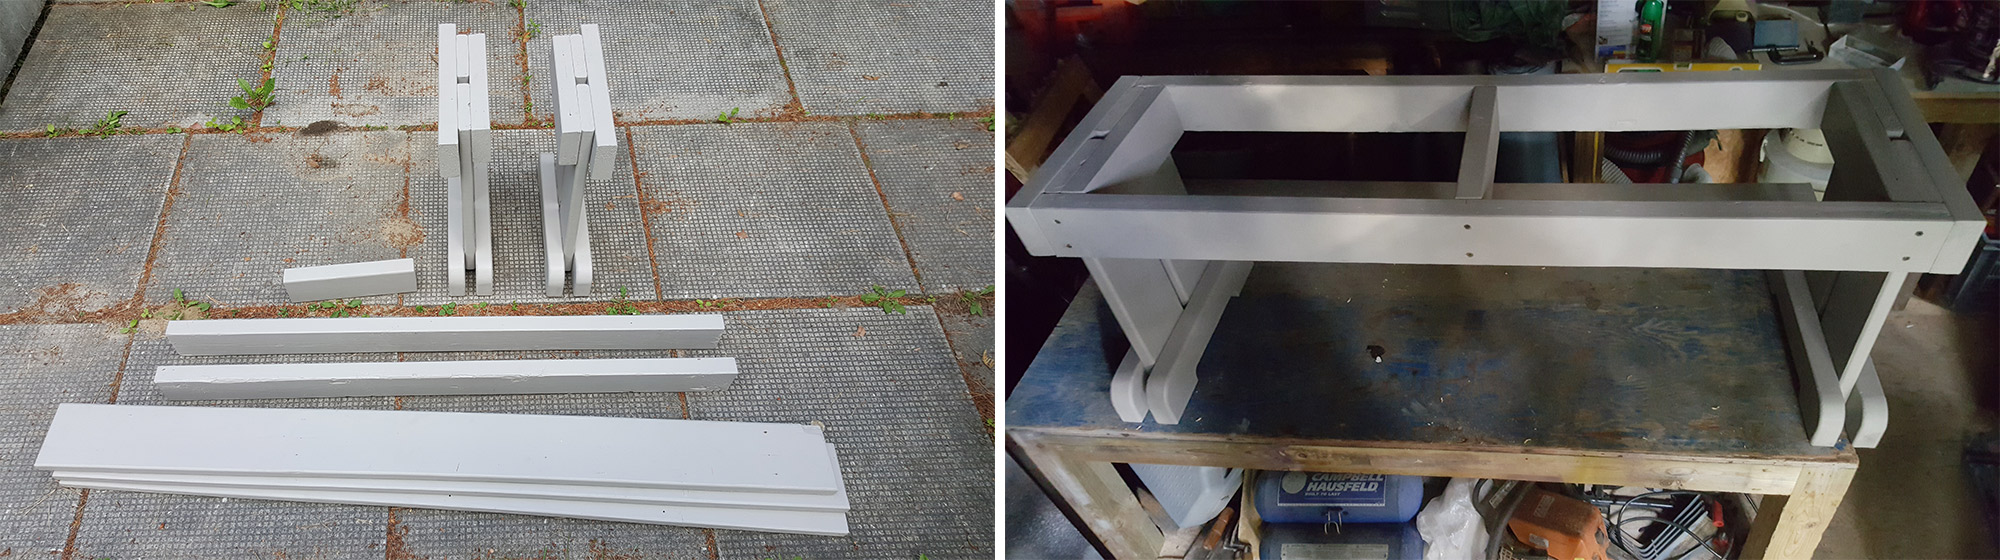 Left: Parts ready for assembly. Right: Assembling the bench.